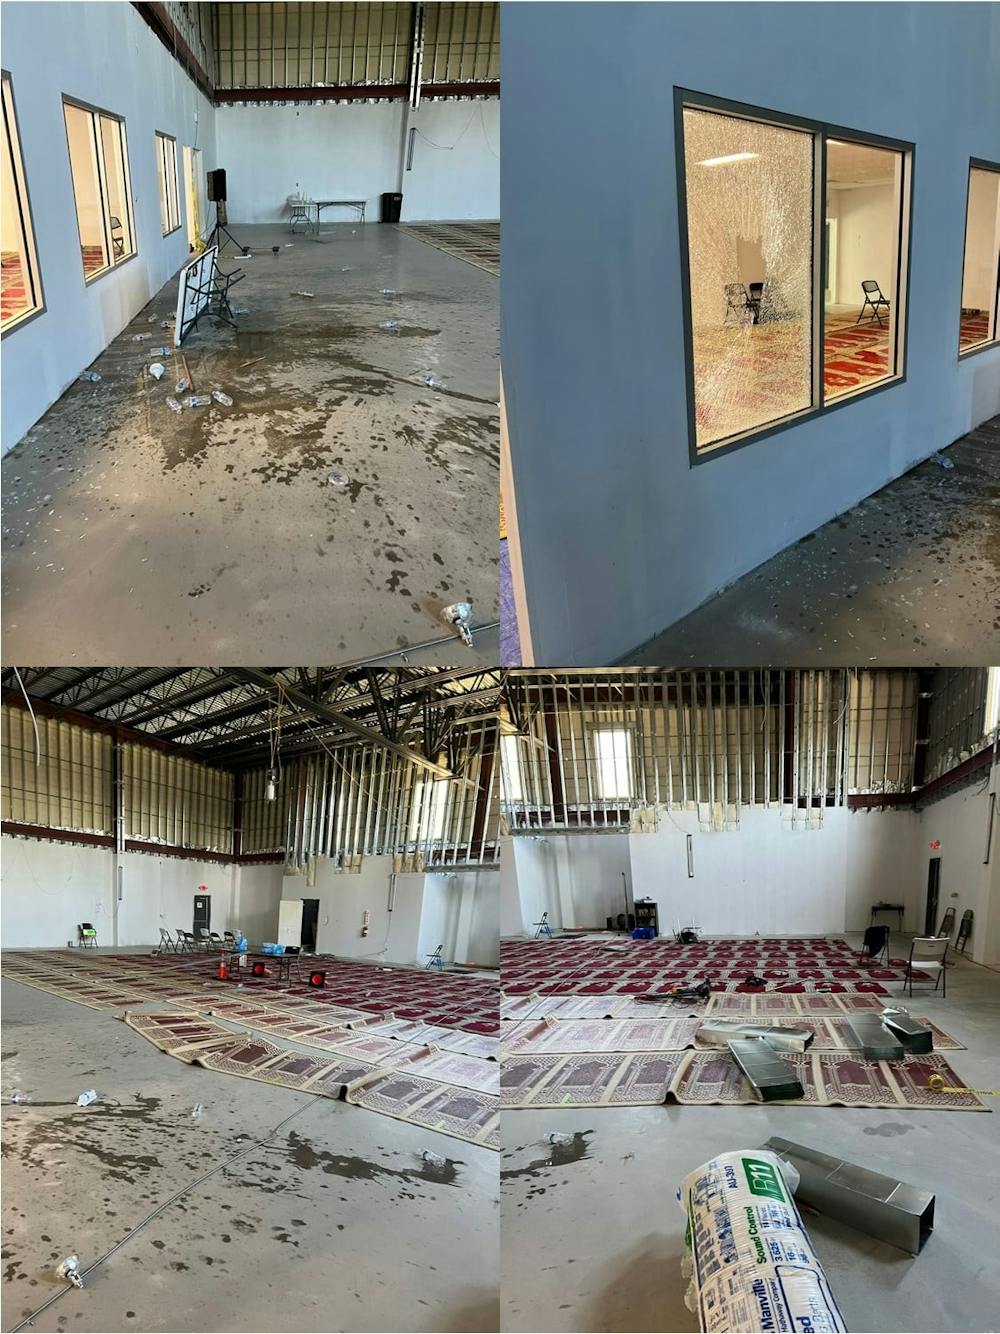 <p>The West End Islamic Center was vandalized for the second time within six months between the hours of 3:30 p.m. to 4:30 p.m. on April 16. Photos courtesy of WEIC.&nbsp;</p>